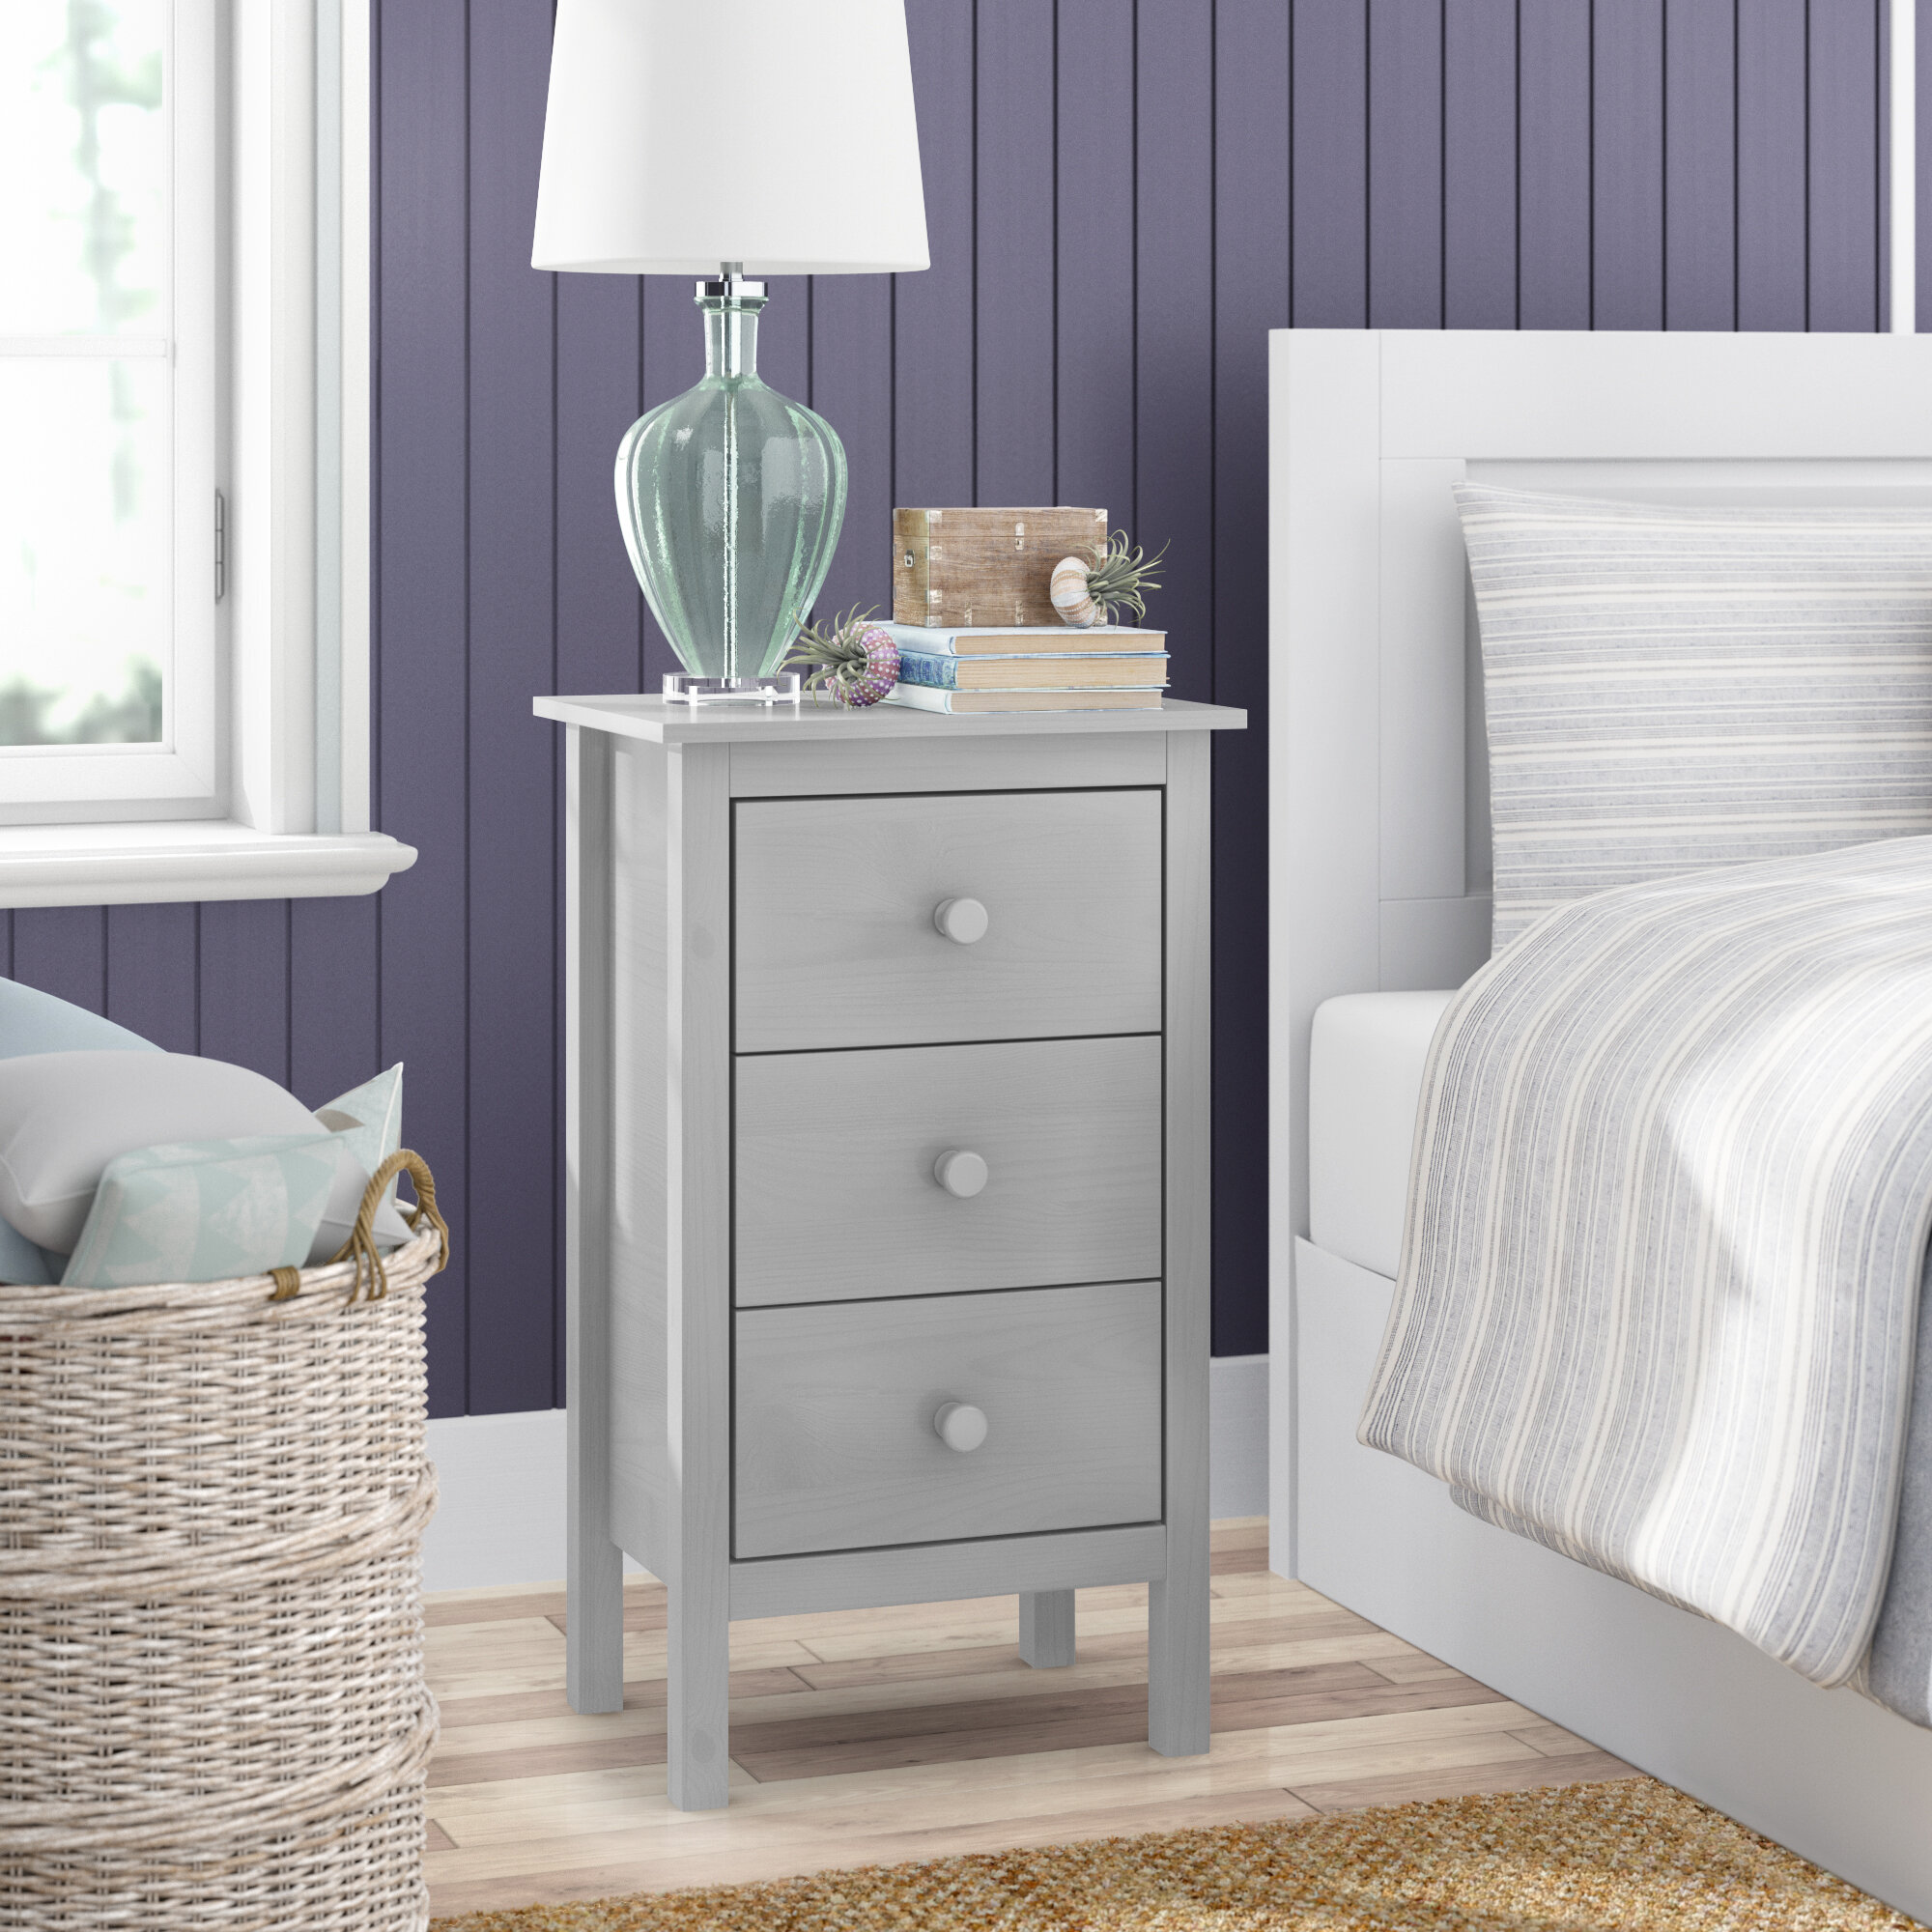 35 Bedside Tables For Your Bedroom's Decor - Best Nightstand